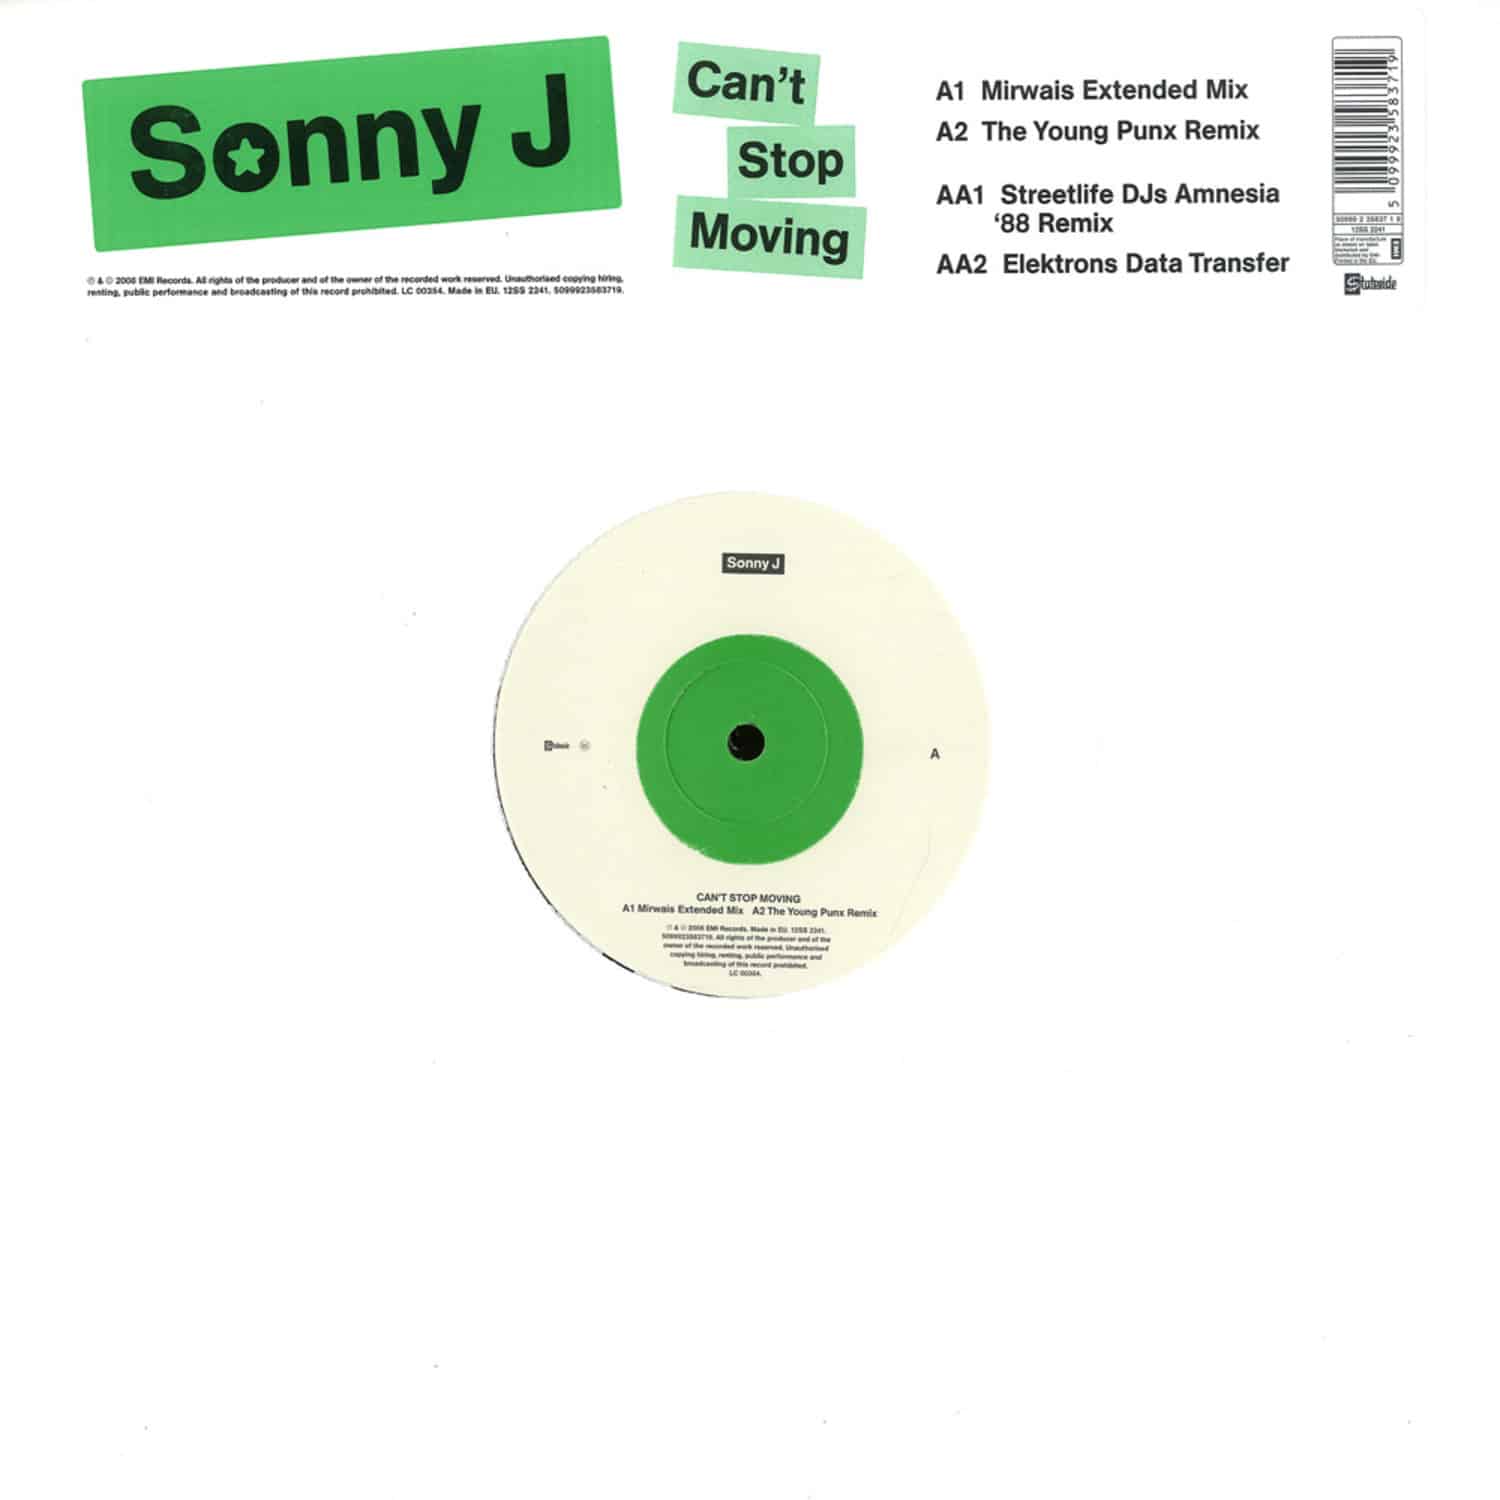 Sonny J - CANT STOP MOVING